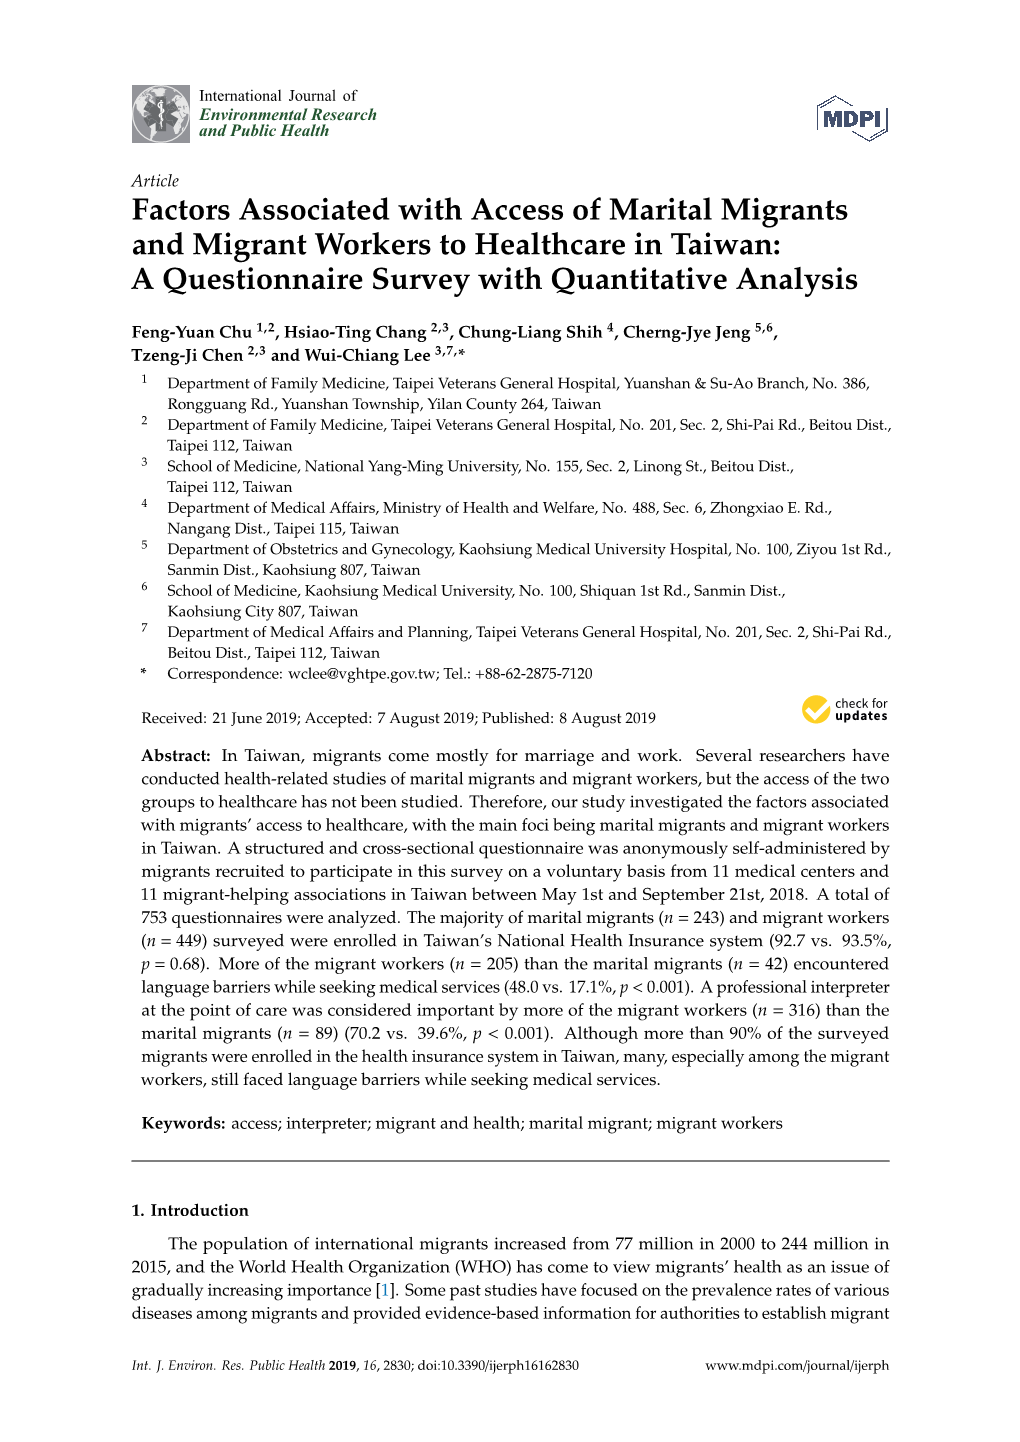 Factors Associated with Access of Marital Migrants and Migrant Workers to Healthcare in Taiwan: a Questionnaire Survey with Quantitative Analysis